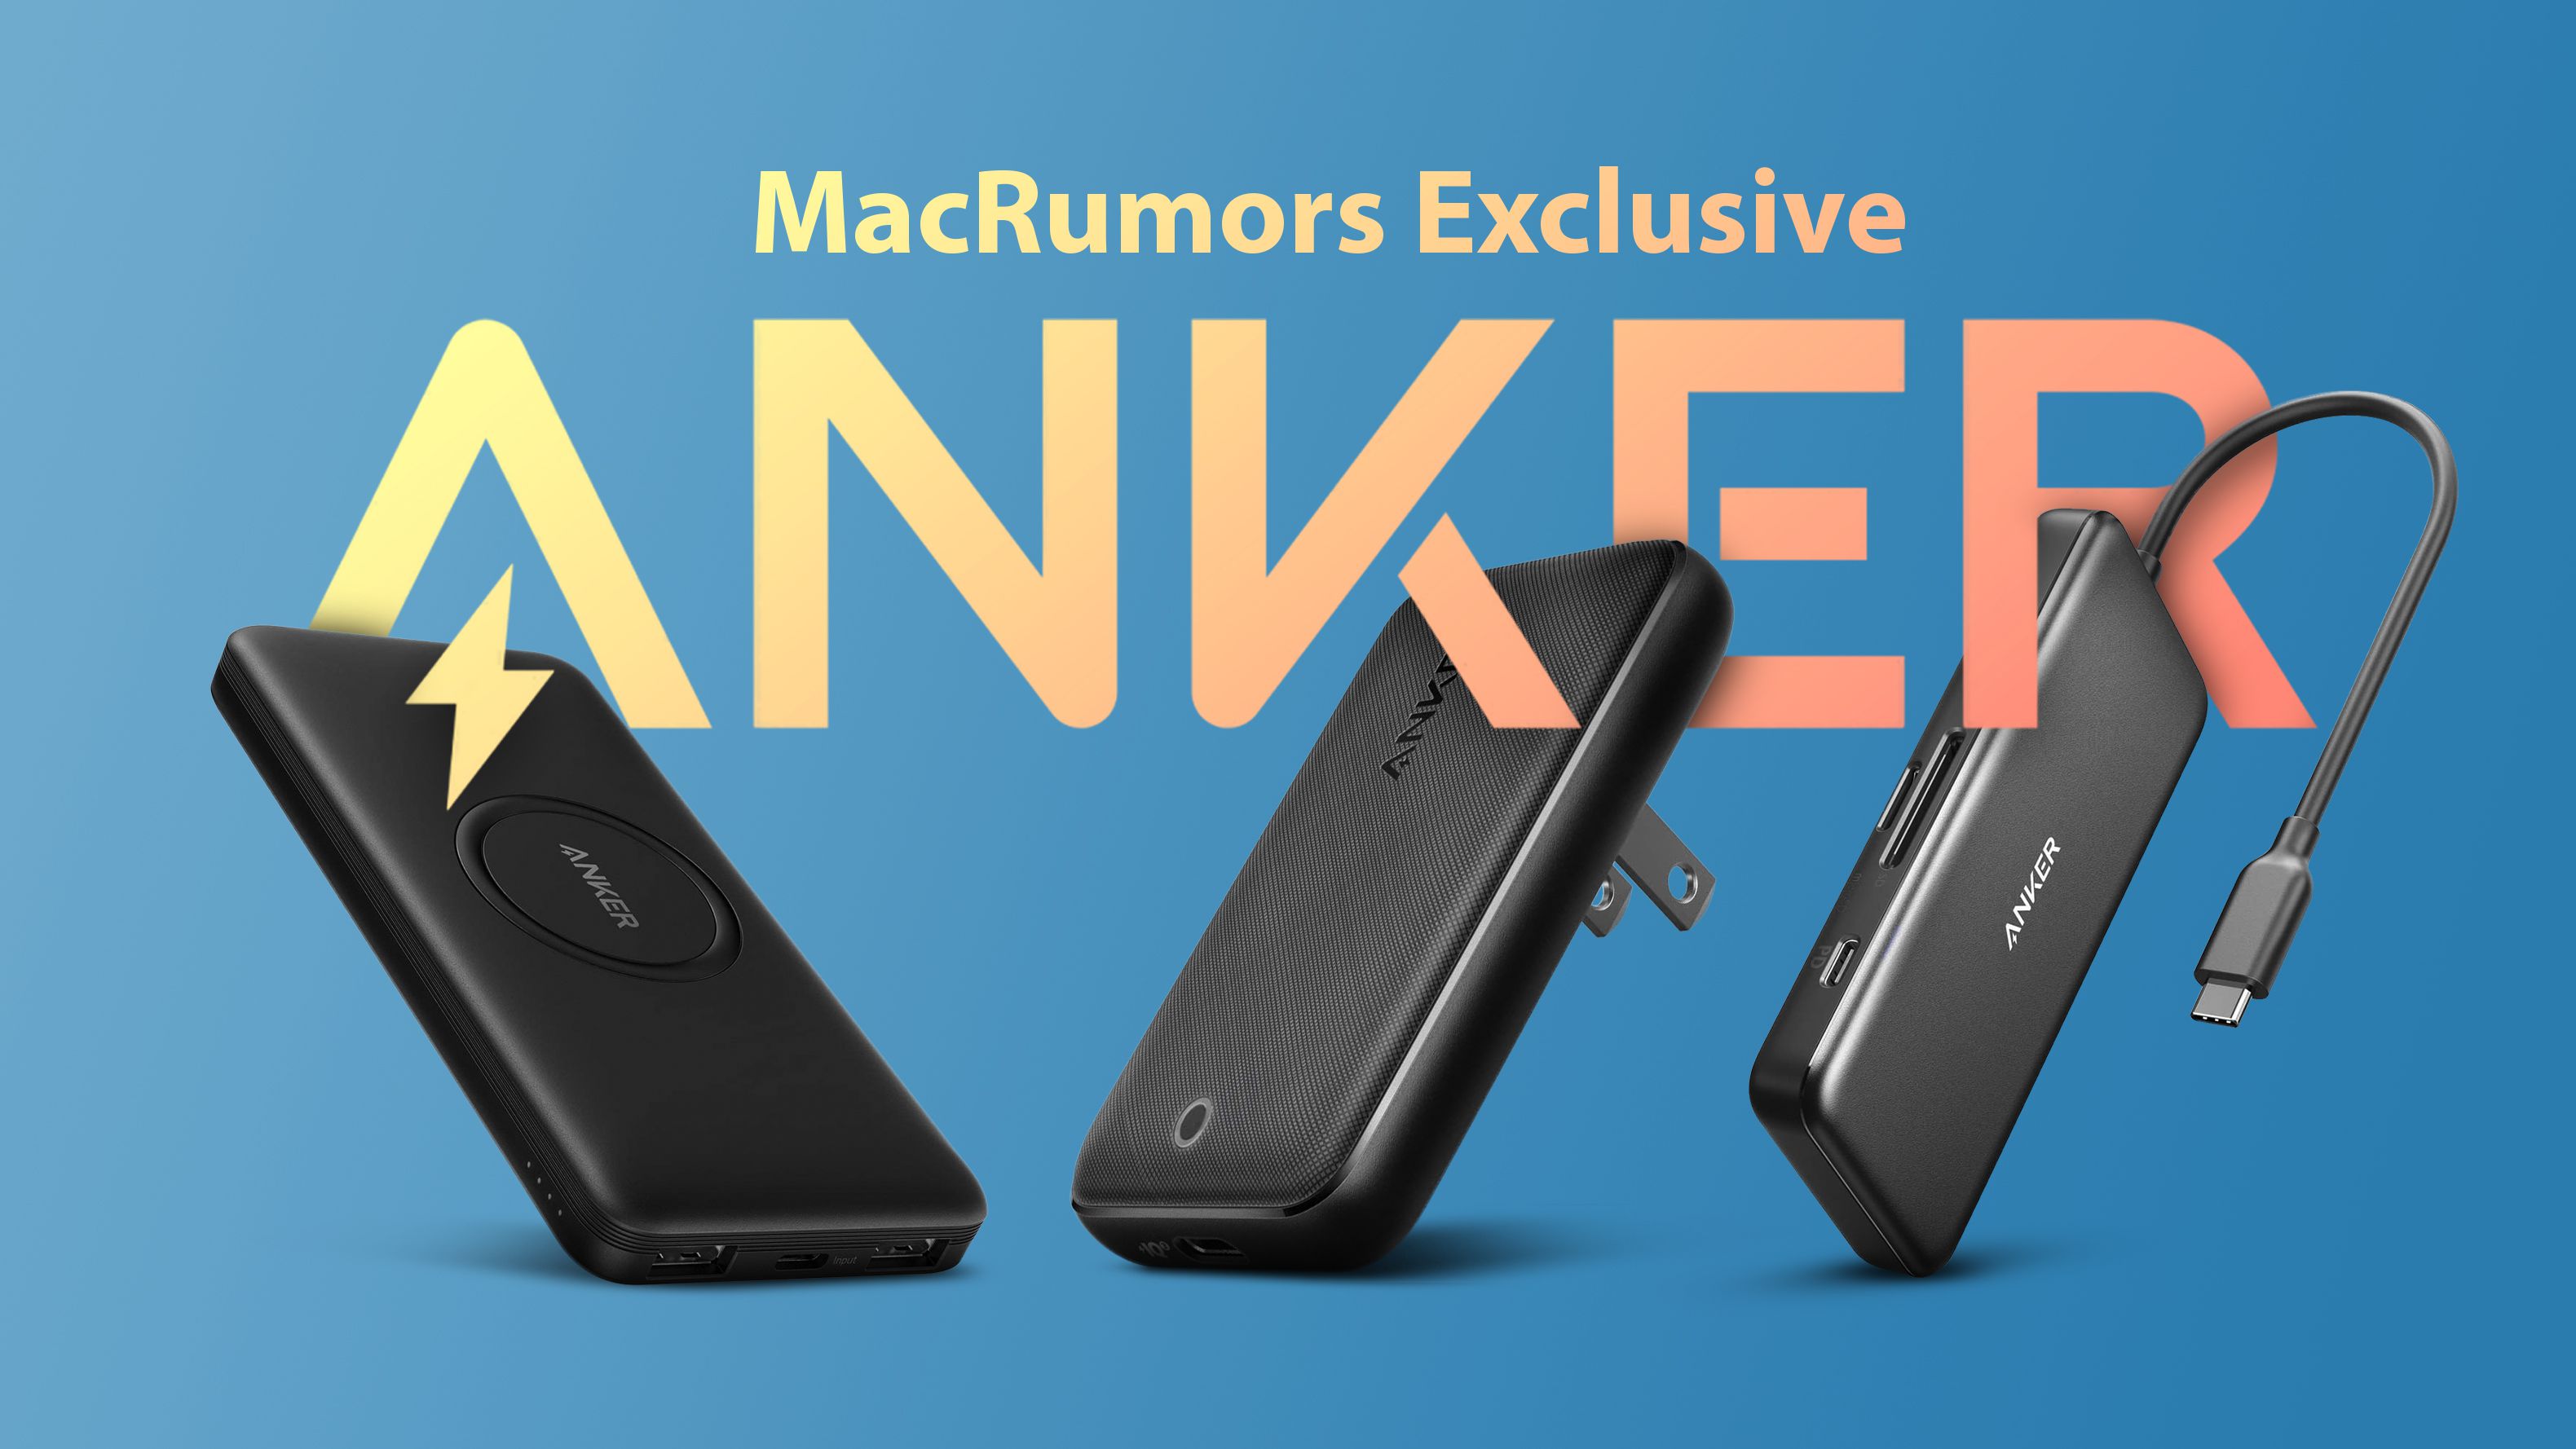 MacRumors Exclusive: Save Up to on Anker's Best Wireless USB-C Hubs, and More -